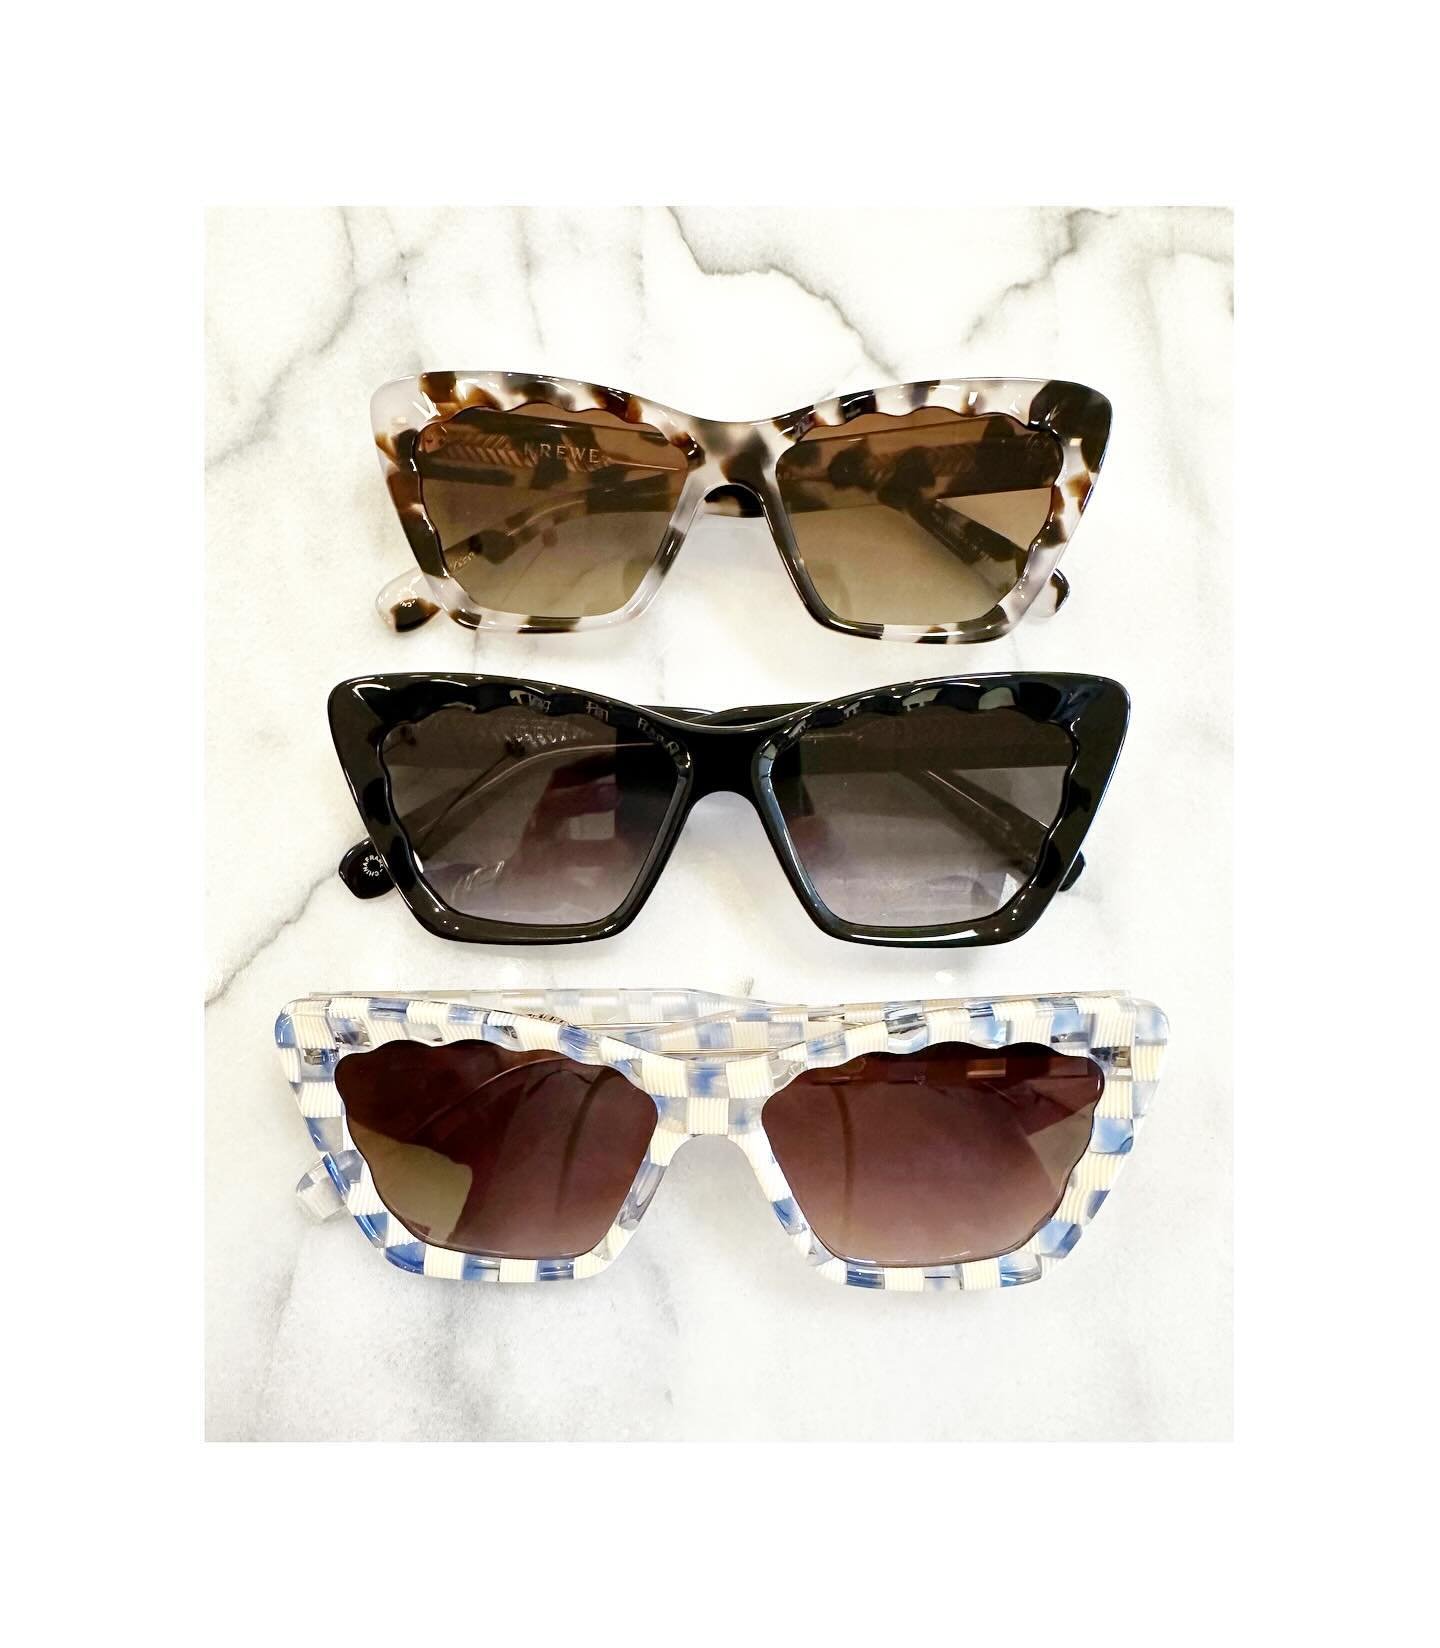 The BRIDGETTE from @krewe is back and in new colours. We love this gorgeously sculptural sunglass. Those scallop details are so beautiful! Available in store now.